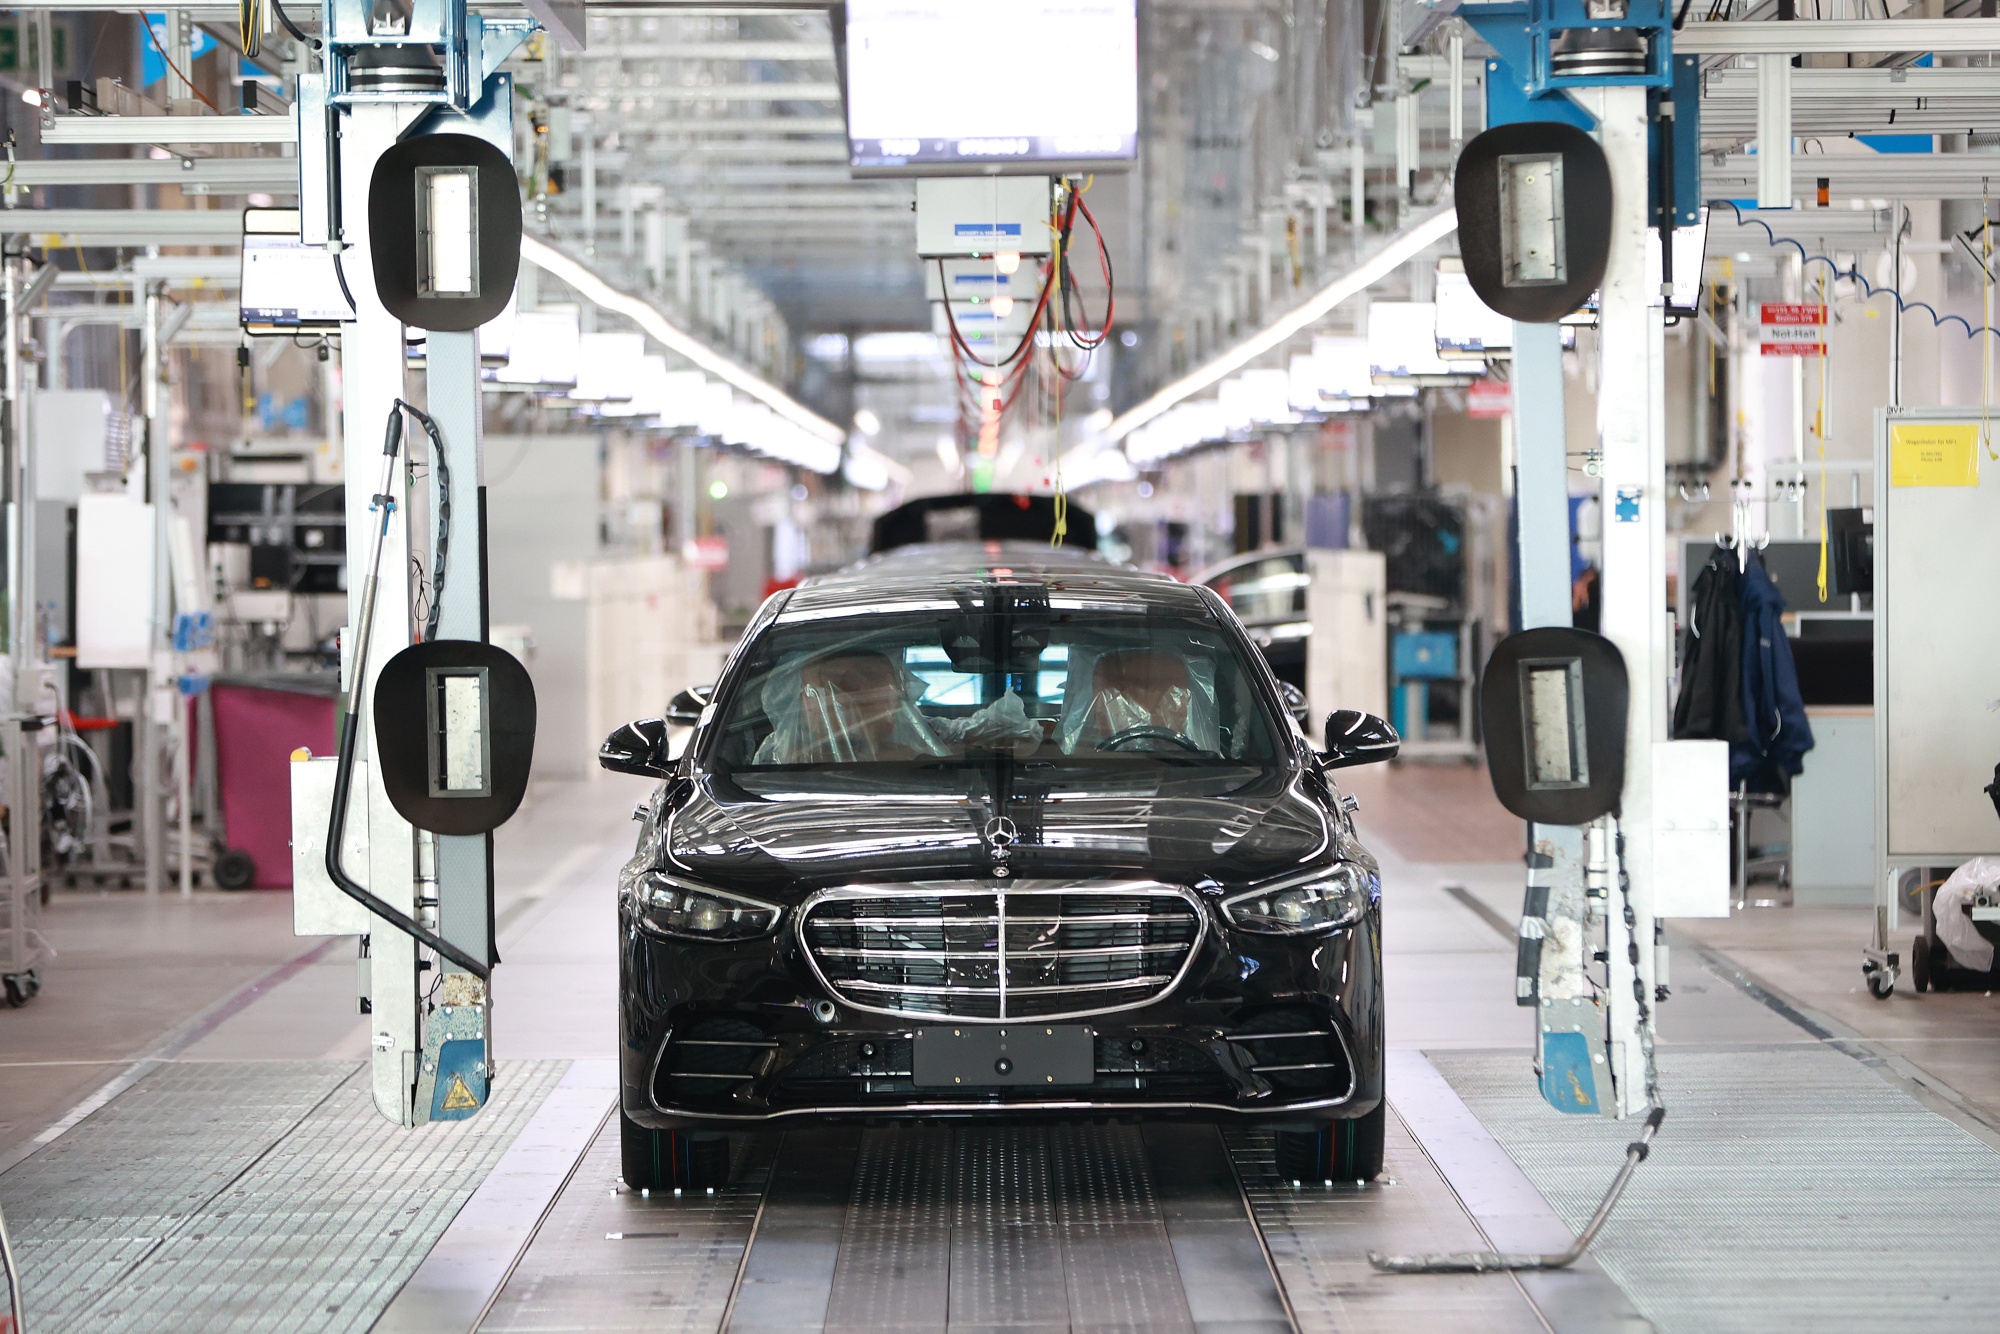 A Mercedes-Benz S-Class luxury automobile rolls off the assembly line at the Mercedes-Benz Group plant in Sindelfingen, Germany.